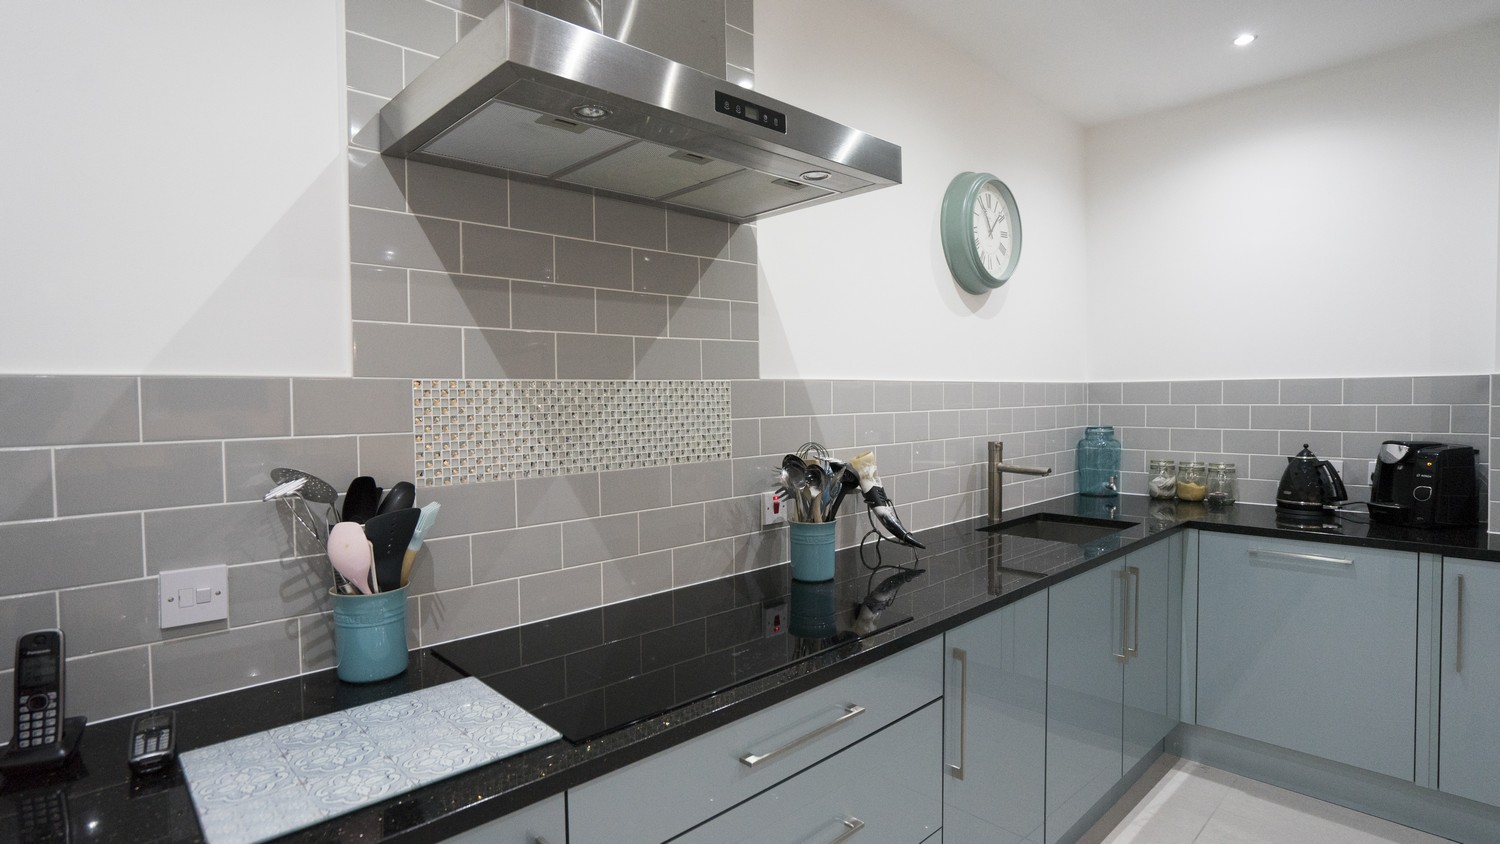 Blue gloss kitchen  with grey tiled splash back, large mirror finish black cooking hob and under-mount sink.